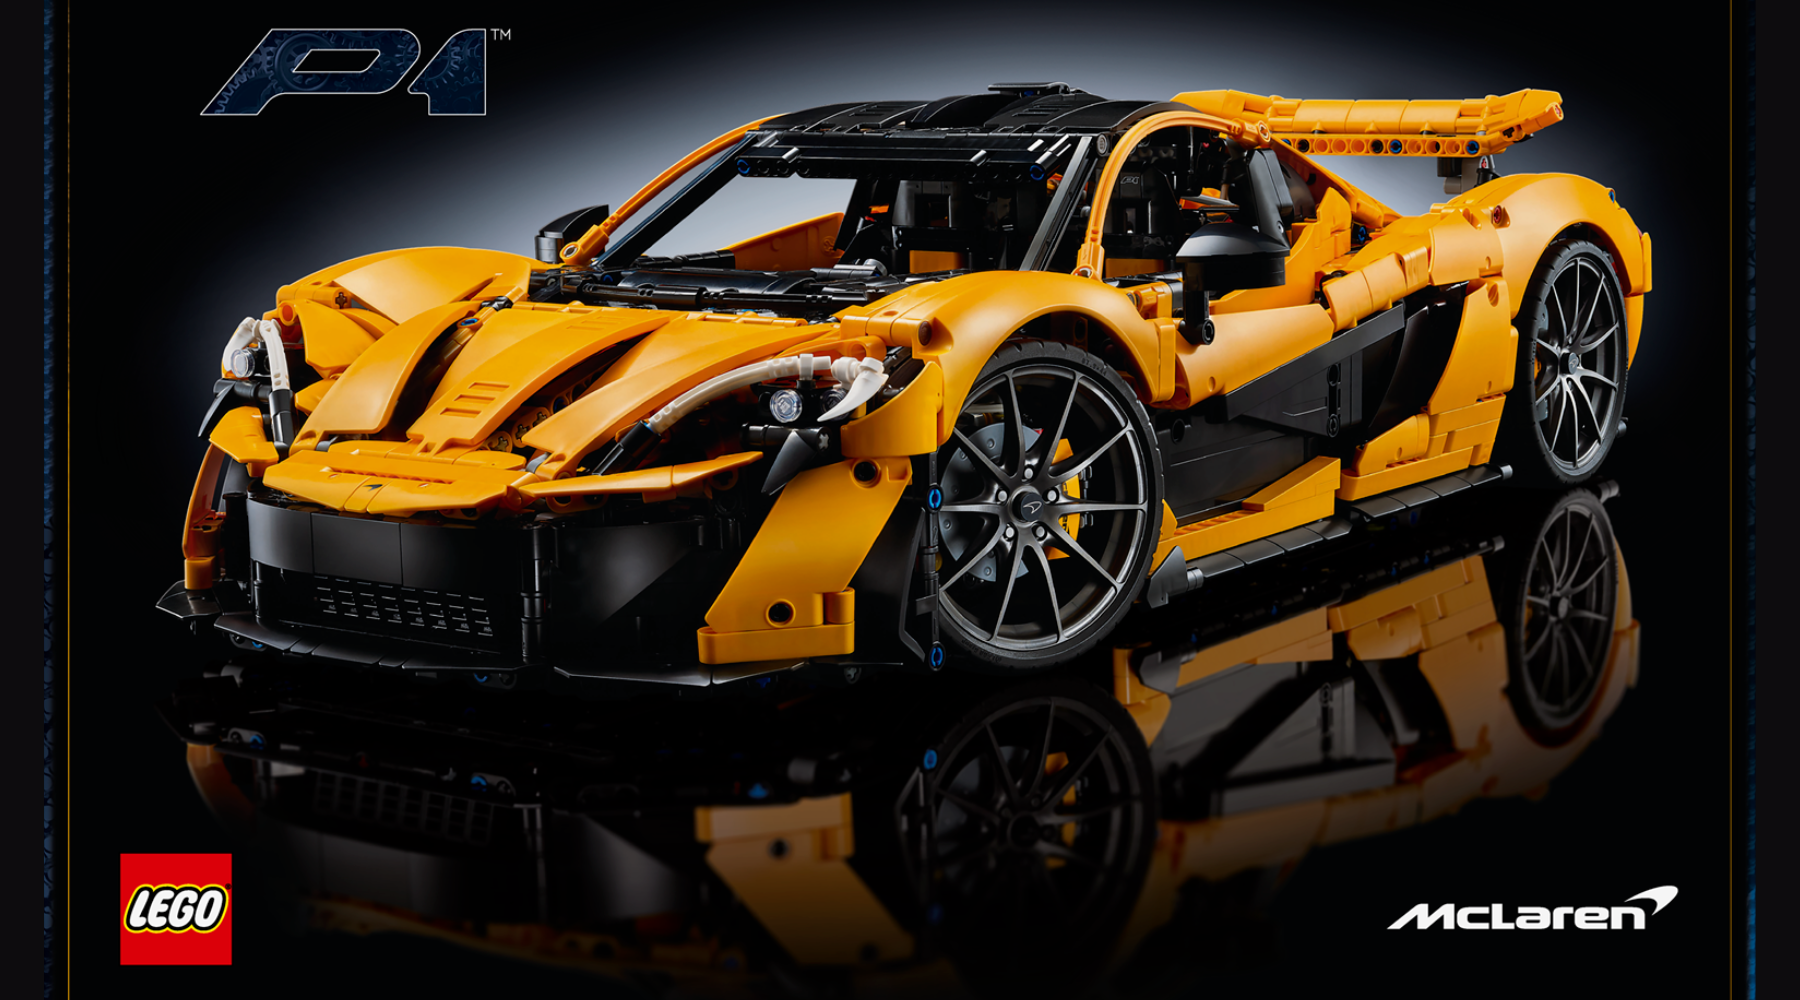 McLaren & Lego Join Forces to Unveil the First-Ever LEGO Model of the McLaren P1